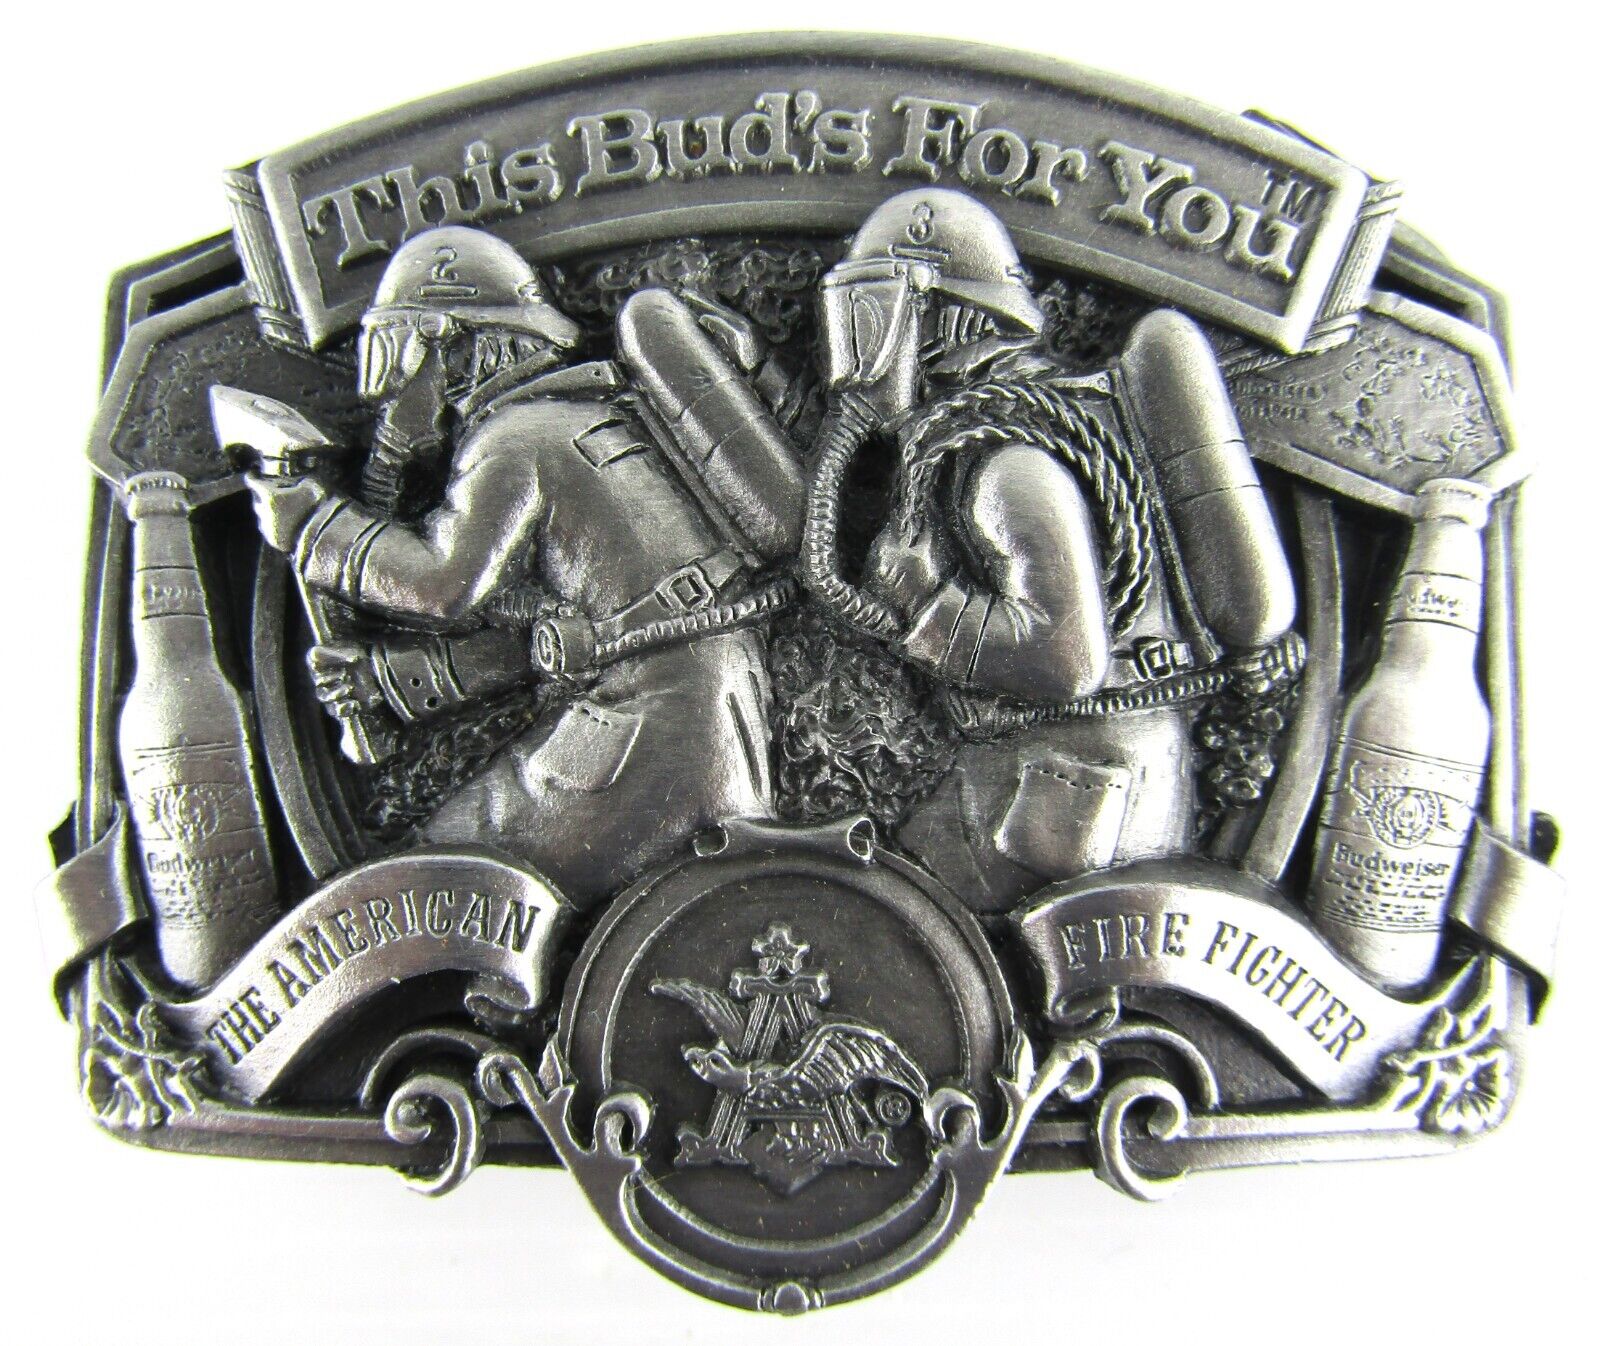 Vintage 1987 Anheuser Busch Firefighter Belt Buckle This Bud\'s For You Metal